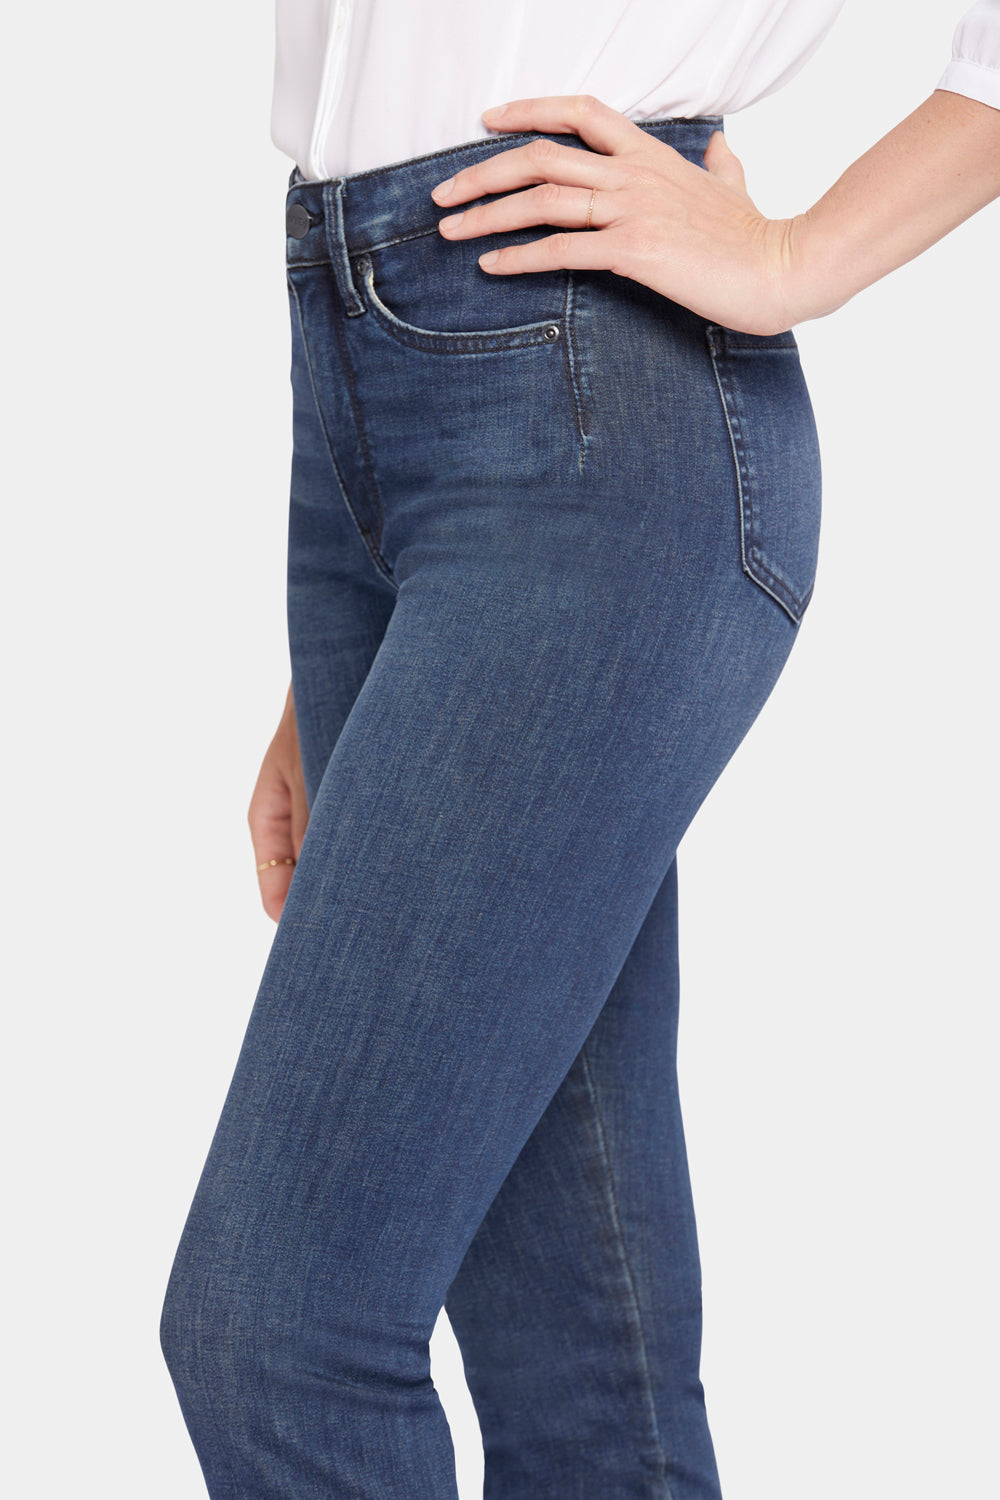 NYDJ Le Silhouette Slim Bootcut Jeans With High Rise - Precious